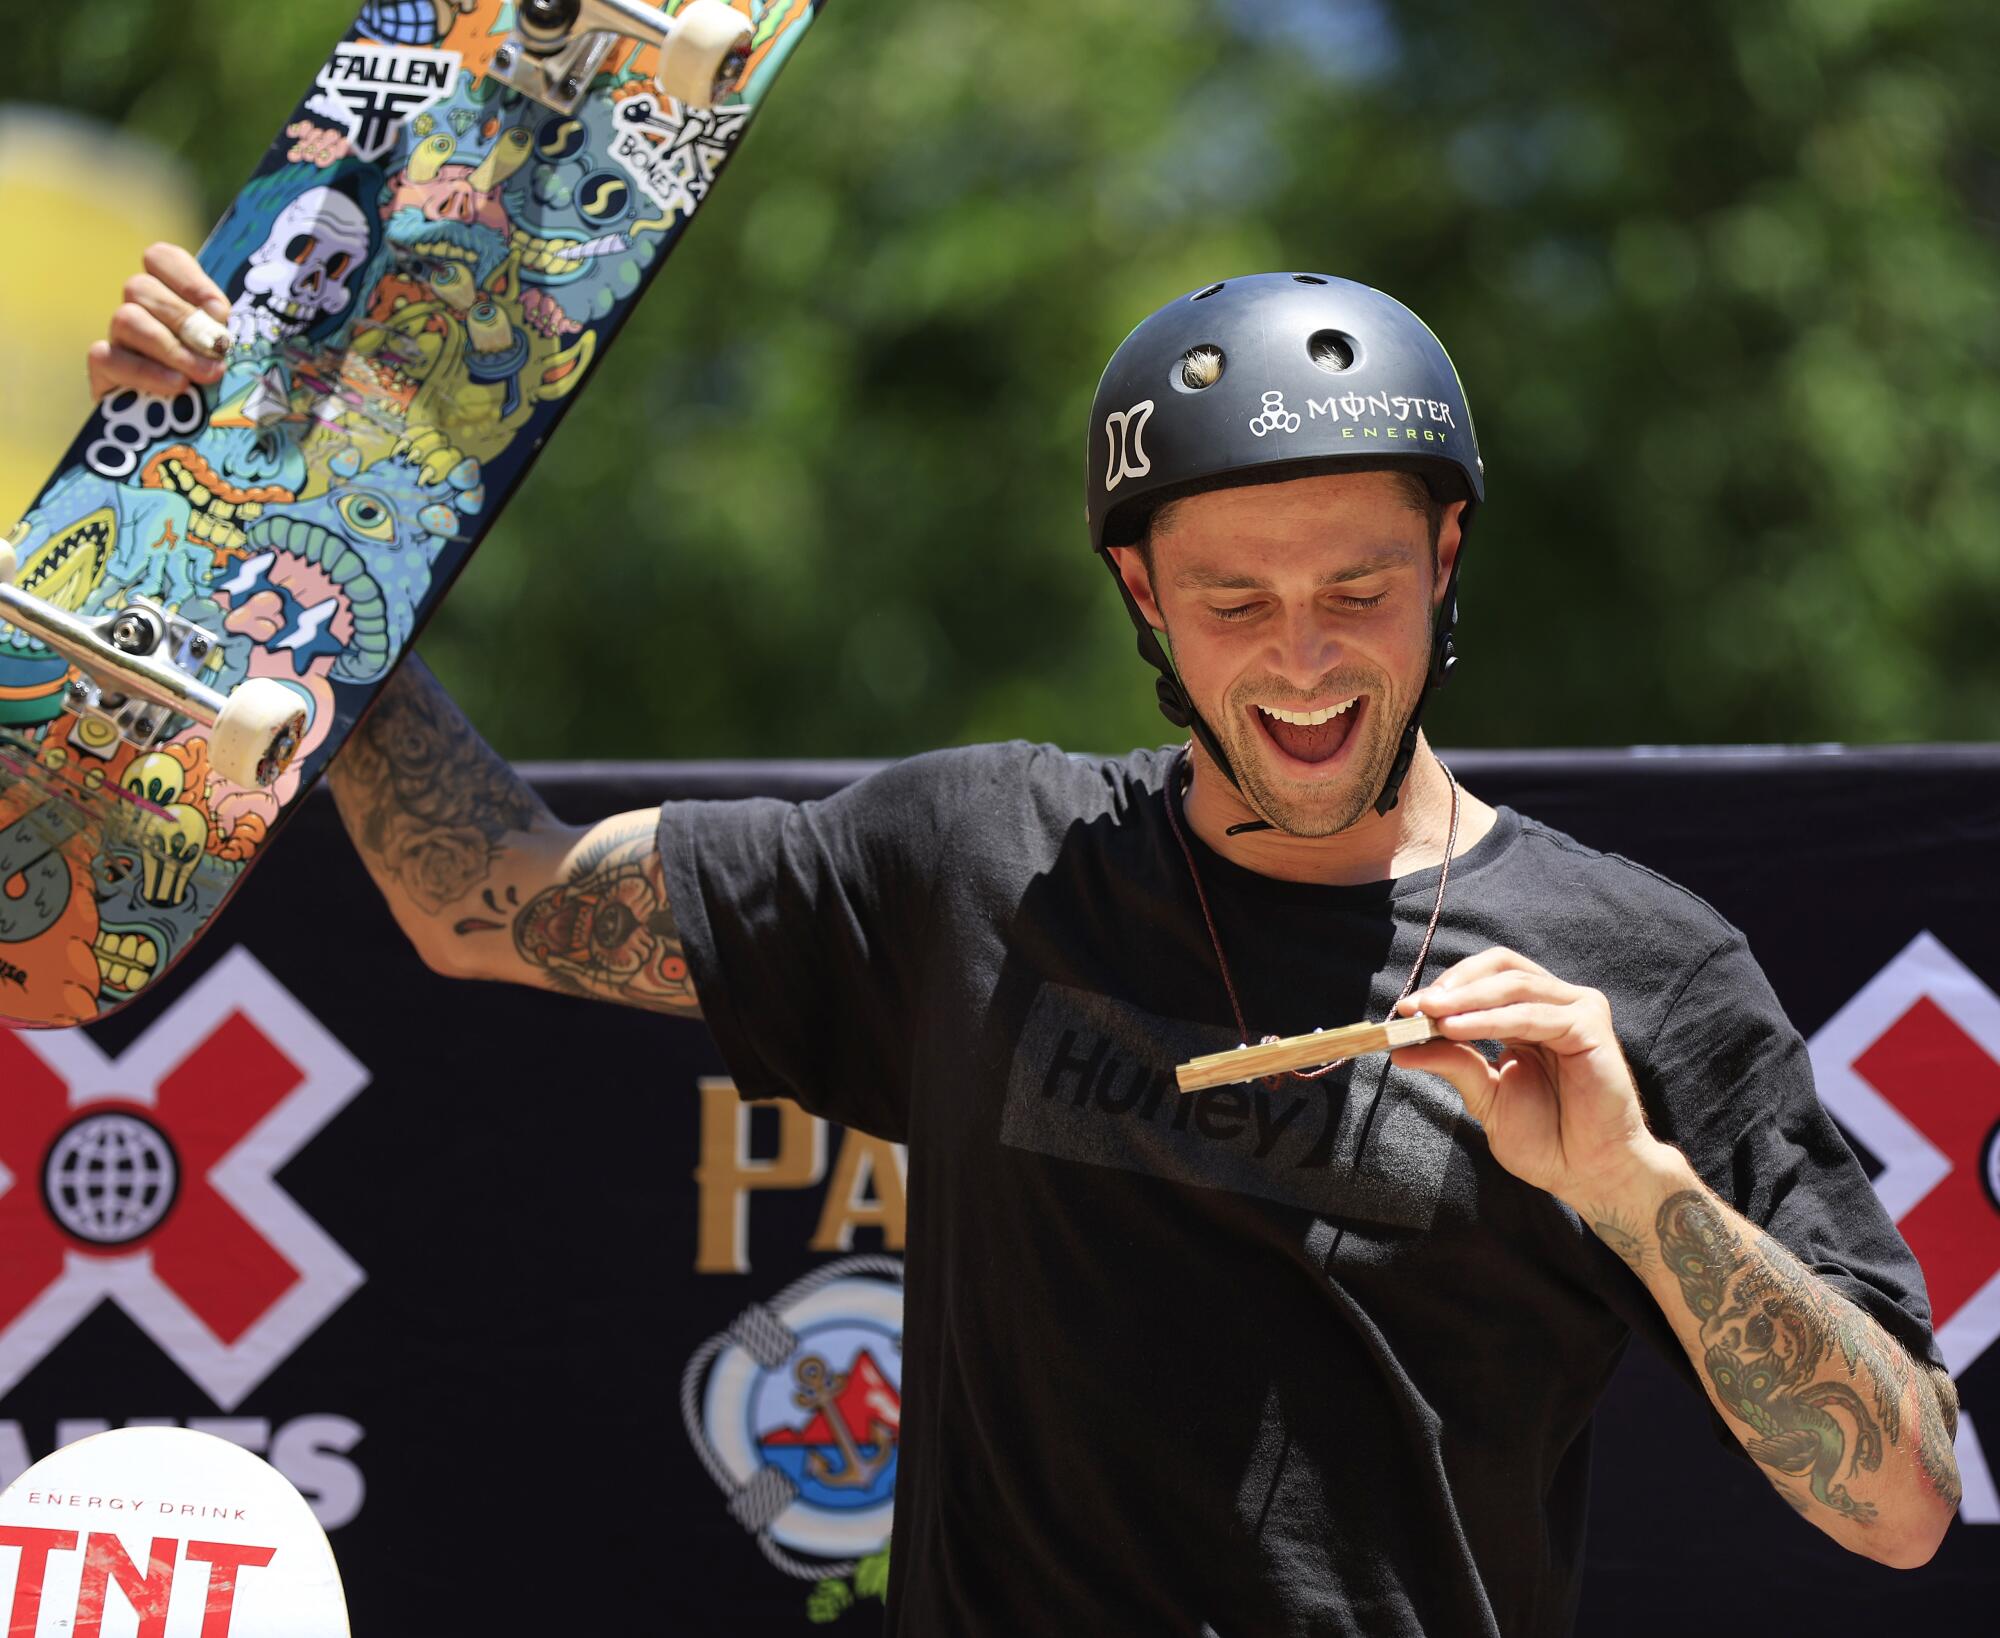 Elliot Sloan looks a his gold medal after he won the skate vert trick competition in the X Games.